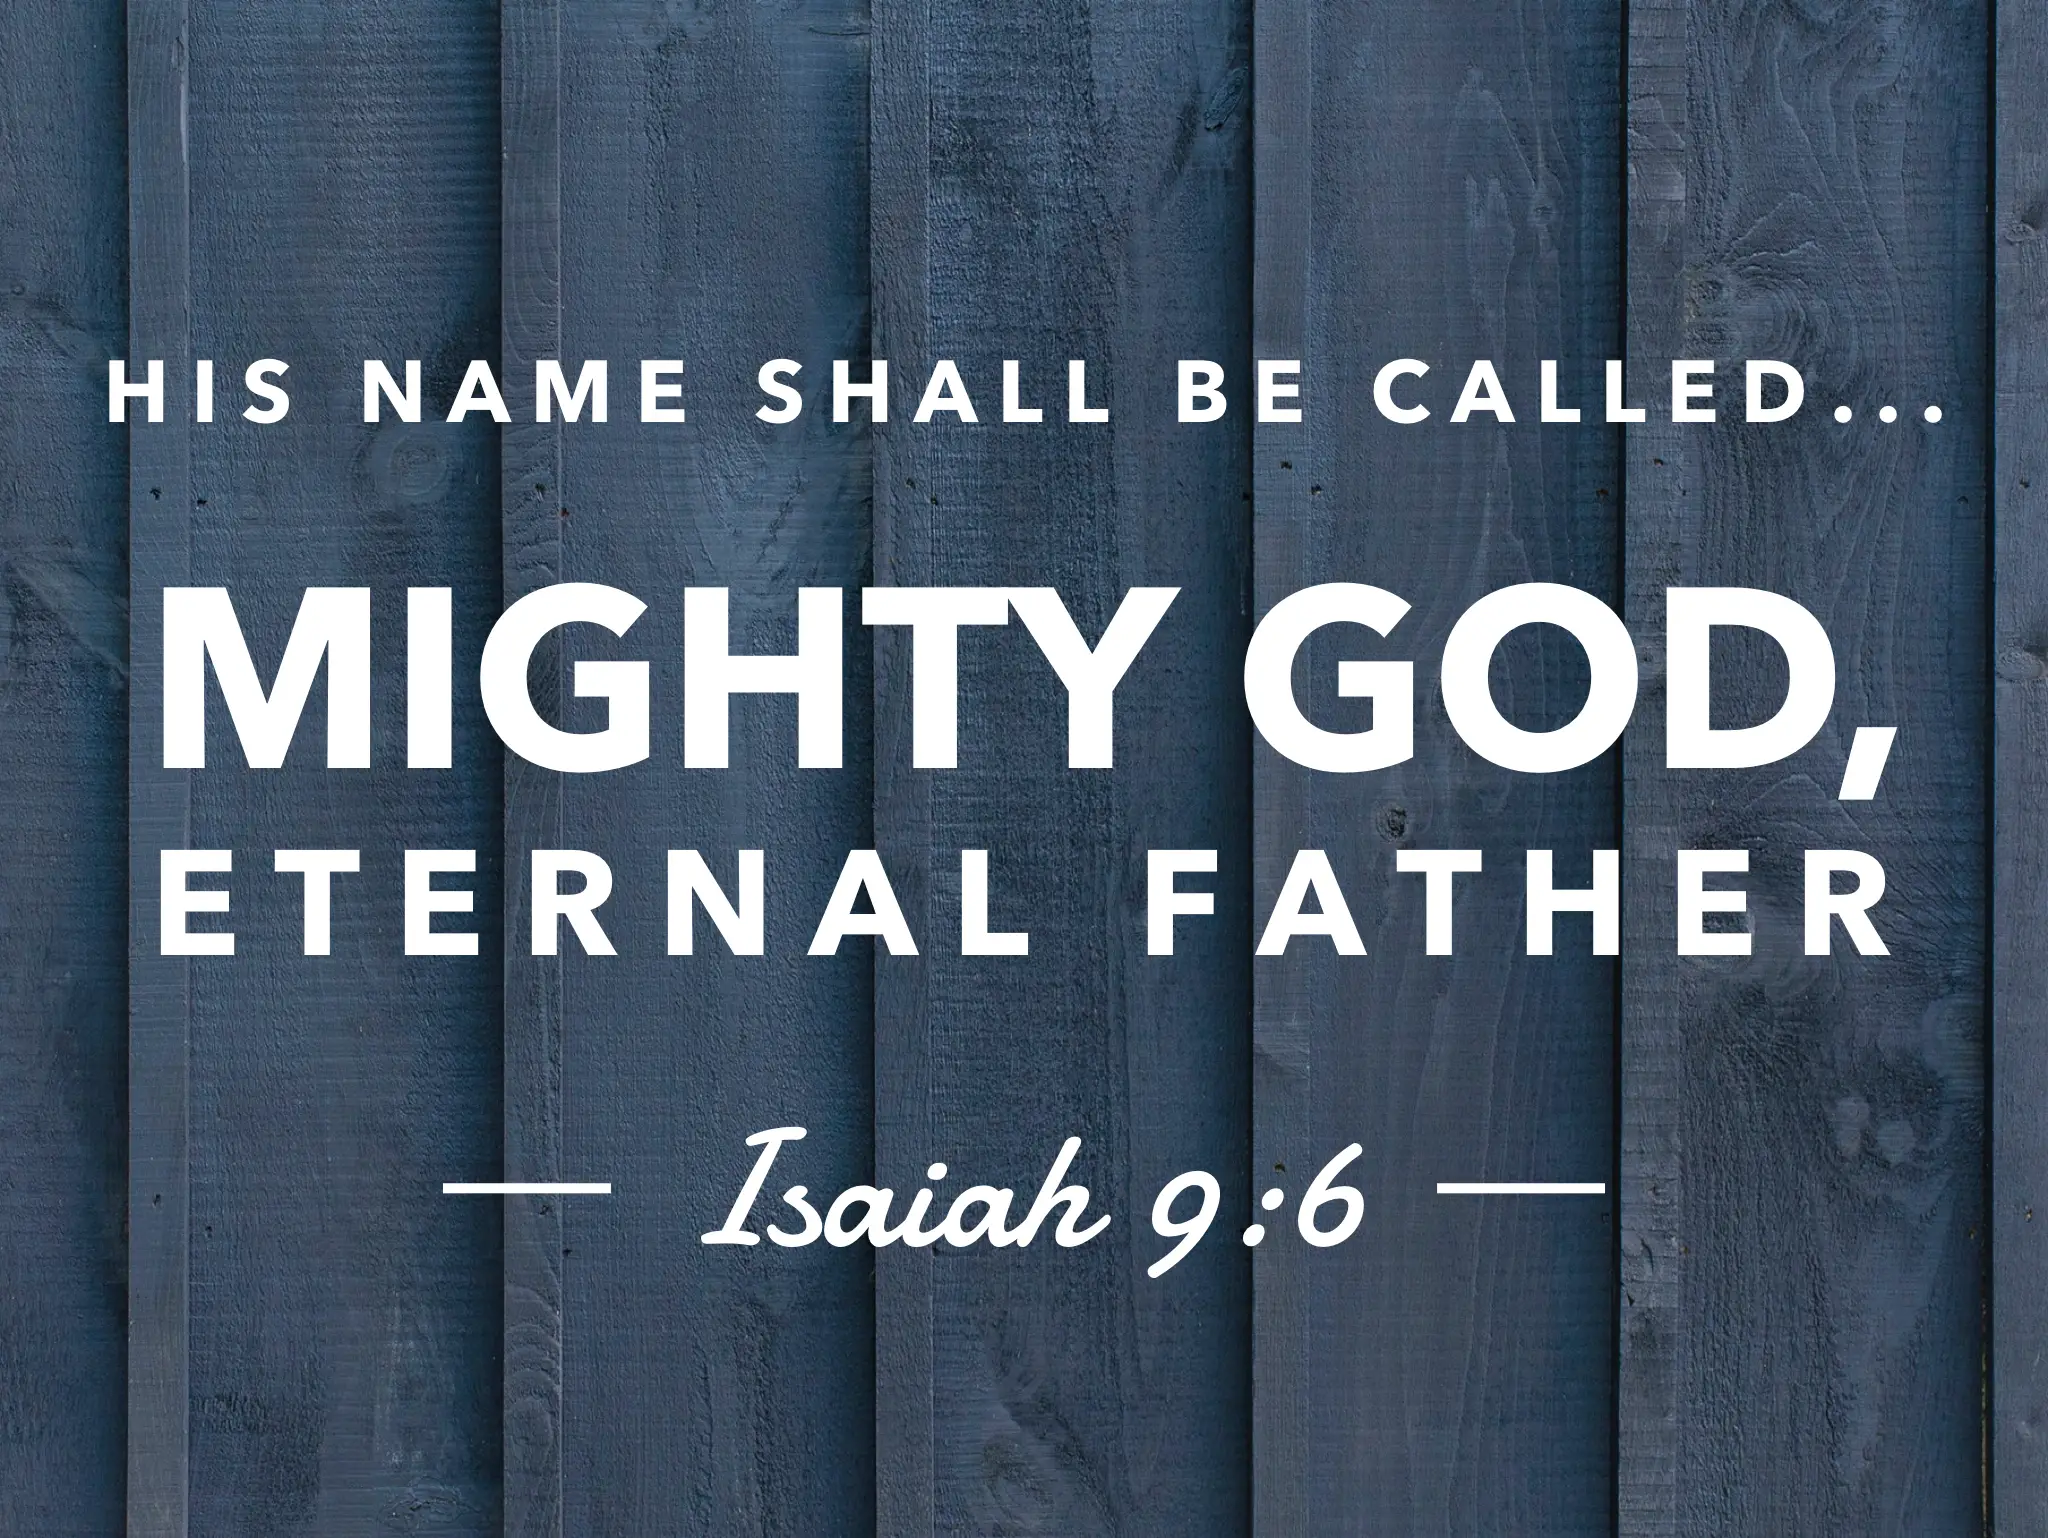 Read more about the article His Name Shall be Called, Mighty God, Eternal Father:  Isaiah 9:6